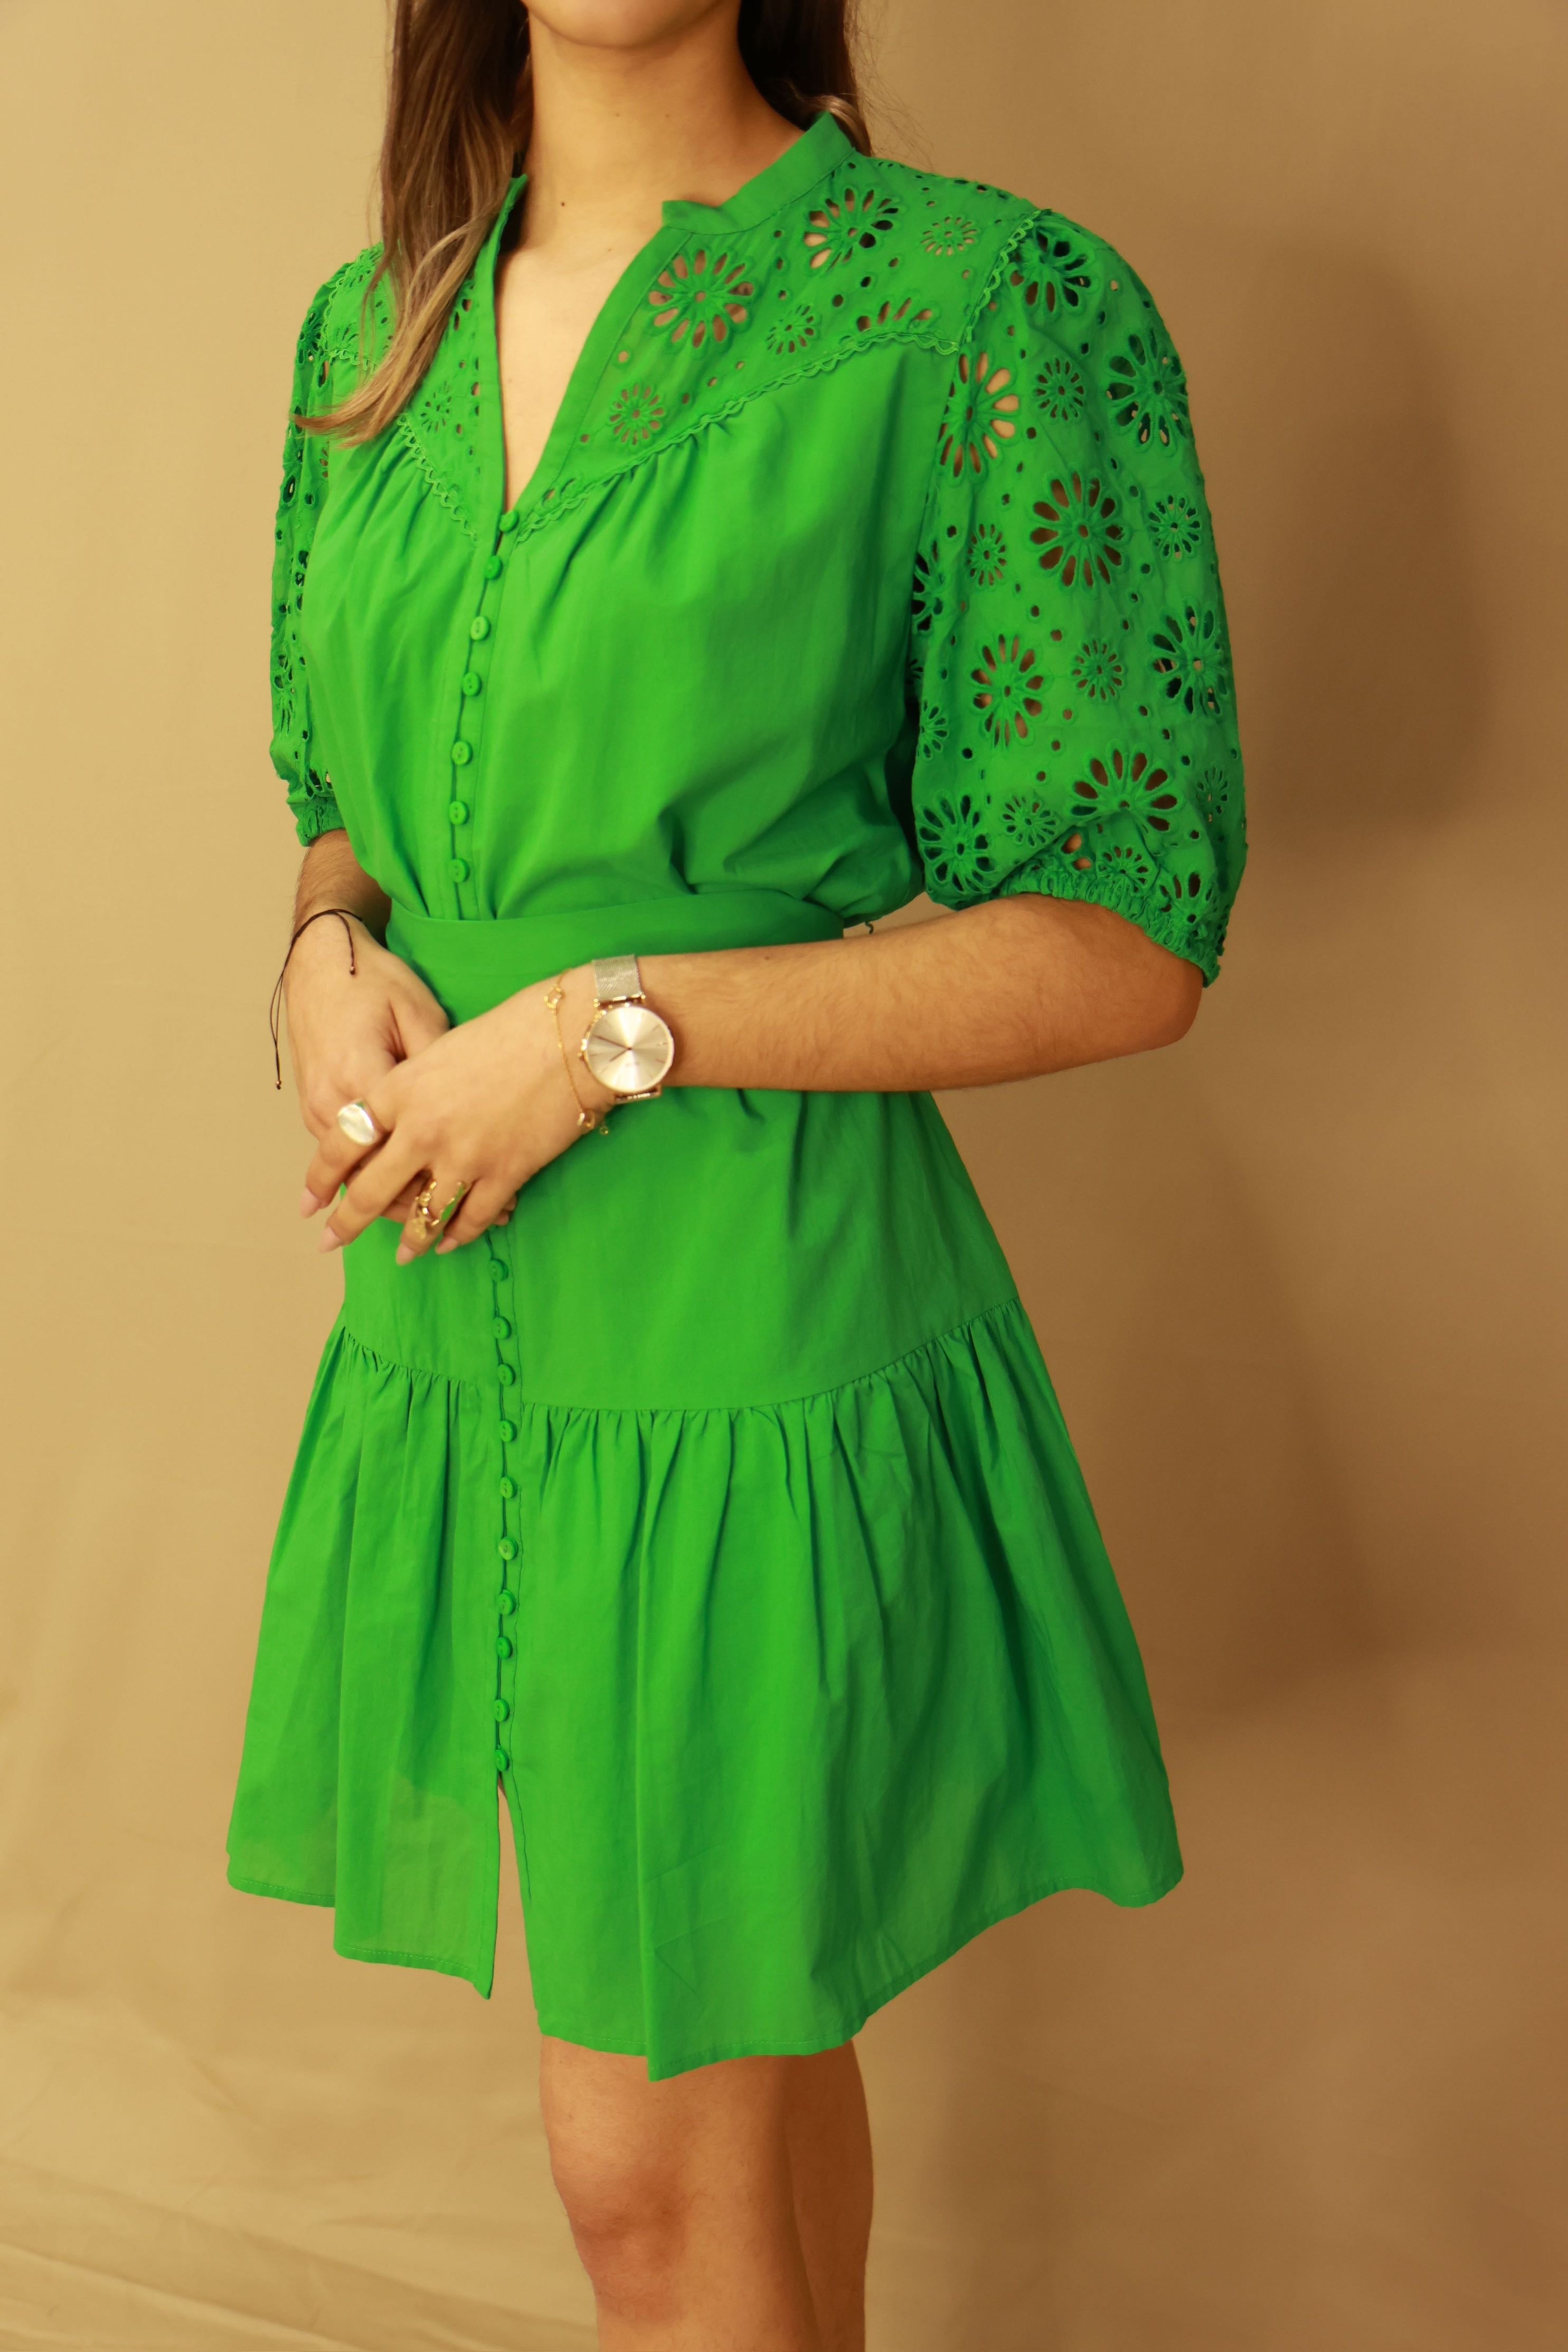 Robe vert Suncoo nouvelle collection